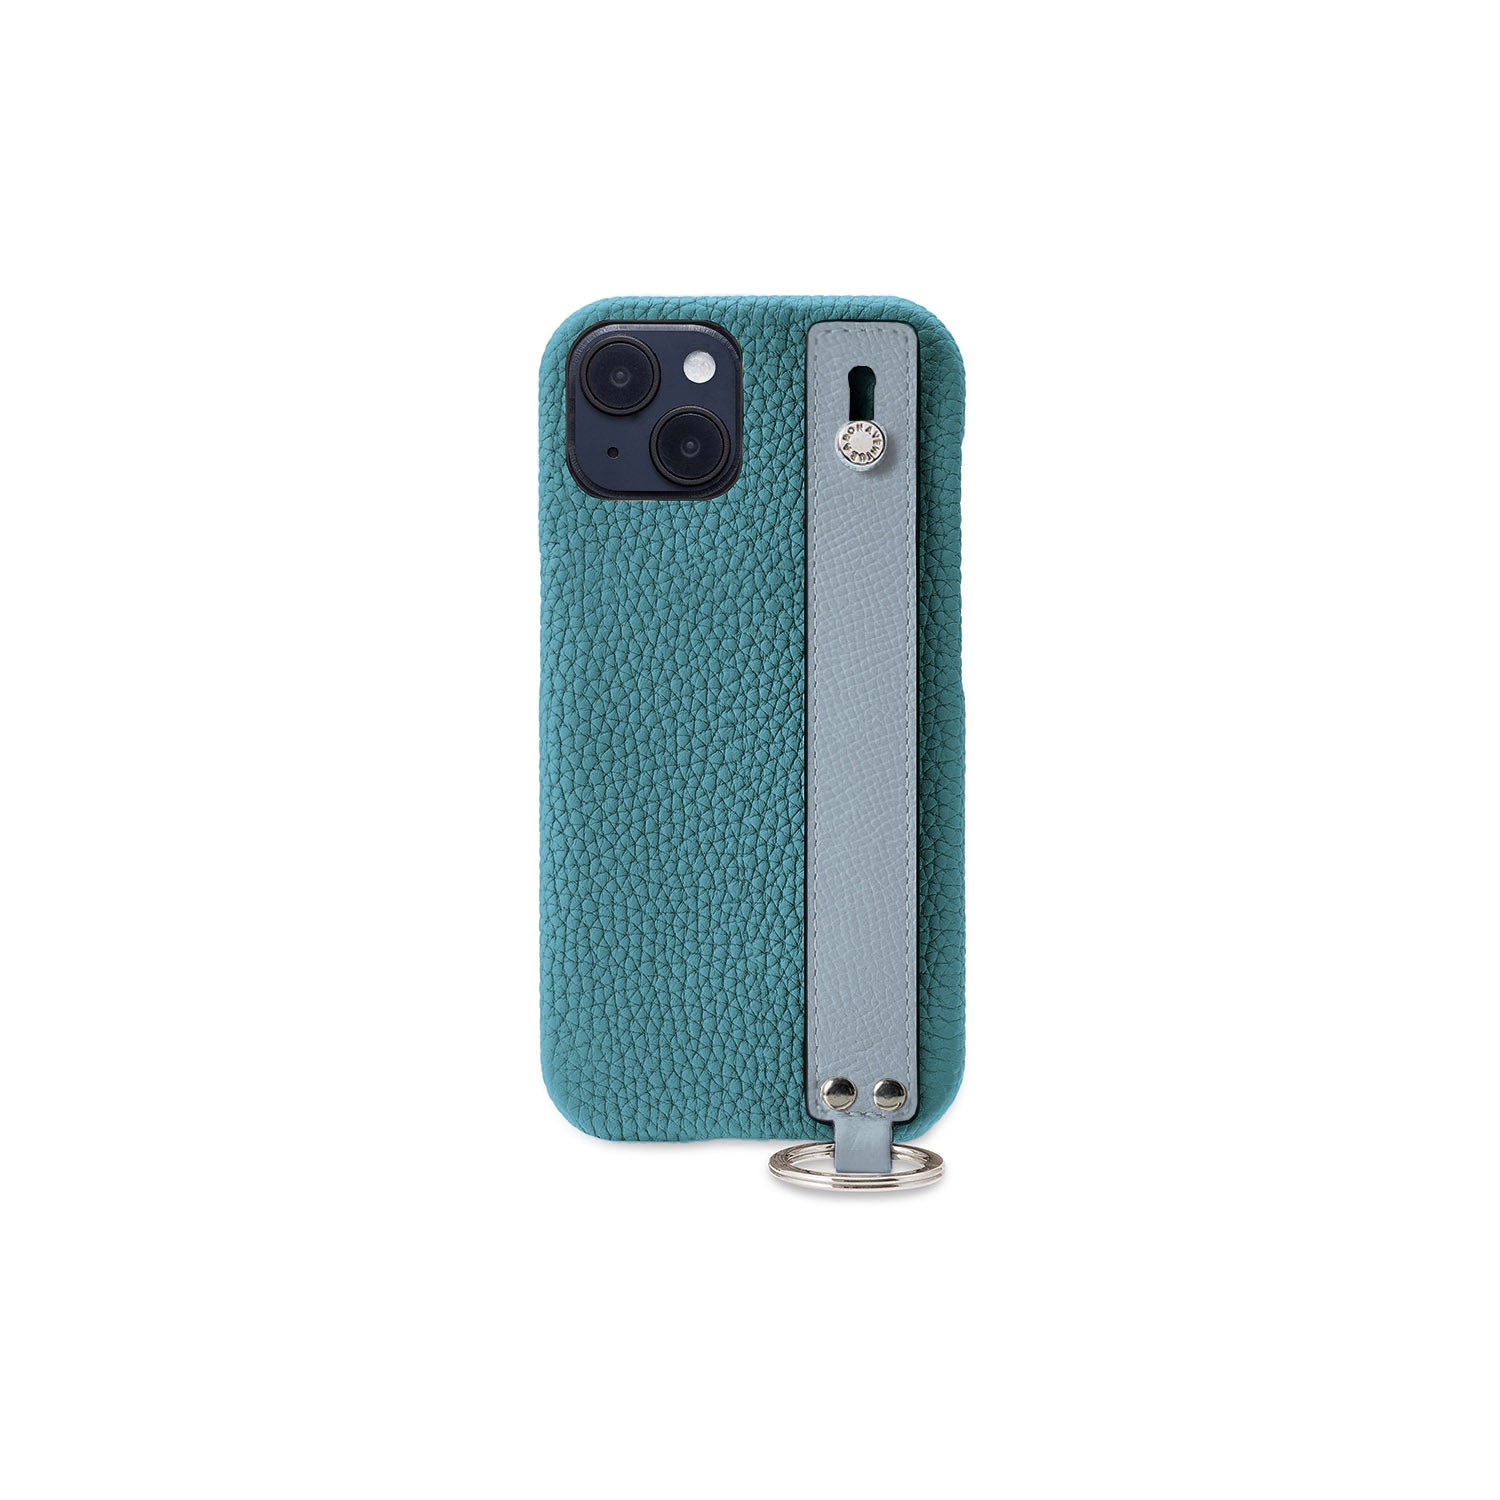 (iPhone 14) Back cover case with handle, shrink leather